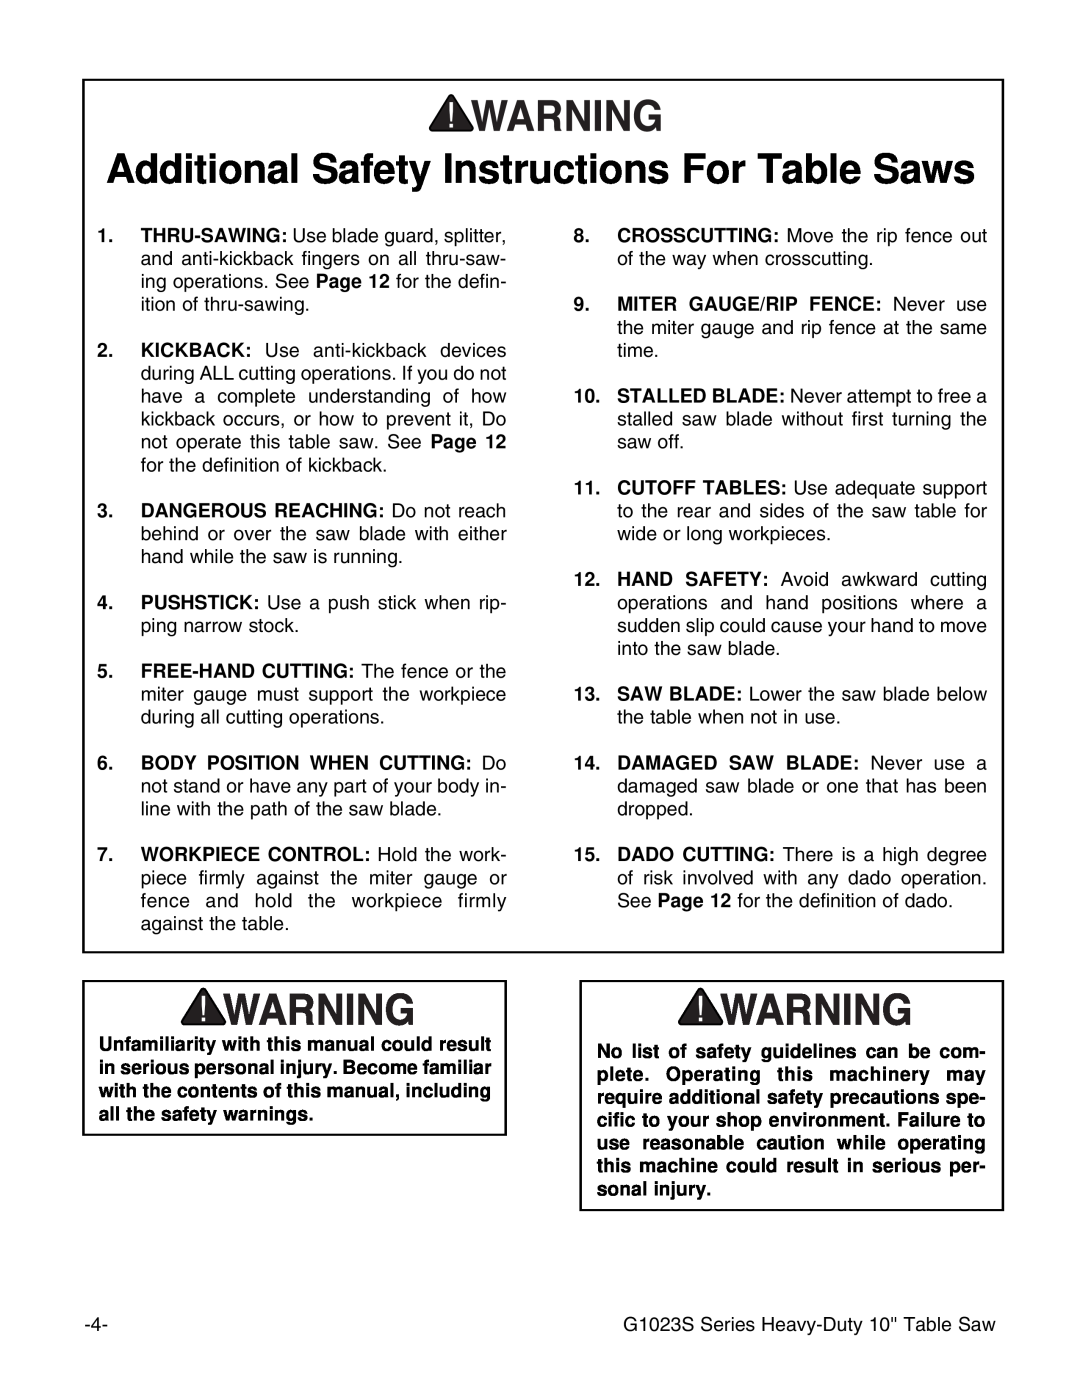 Grizzly MODEL instruction manual Additional Safety Instructions For Table Saws 